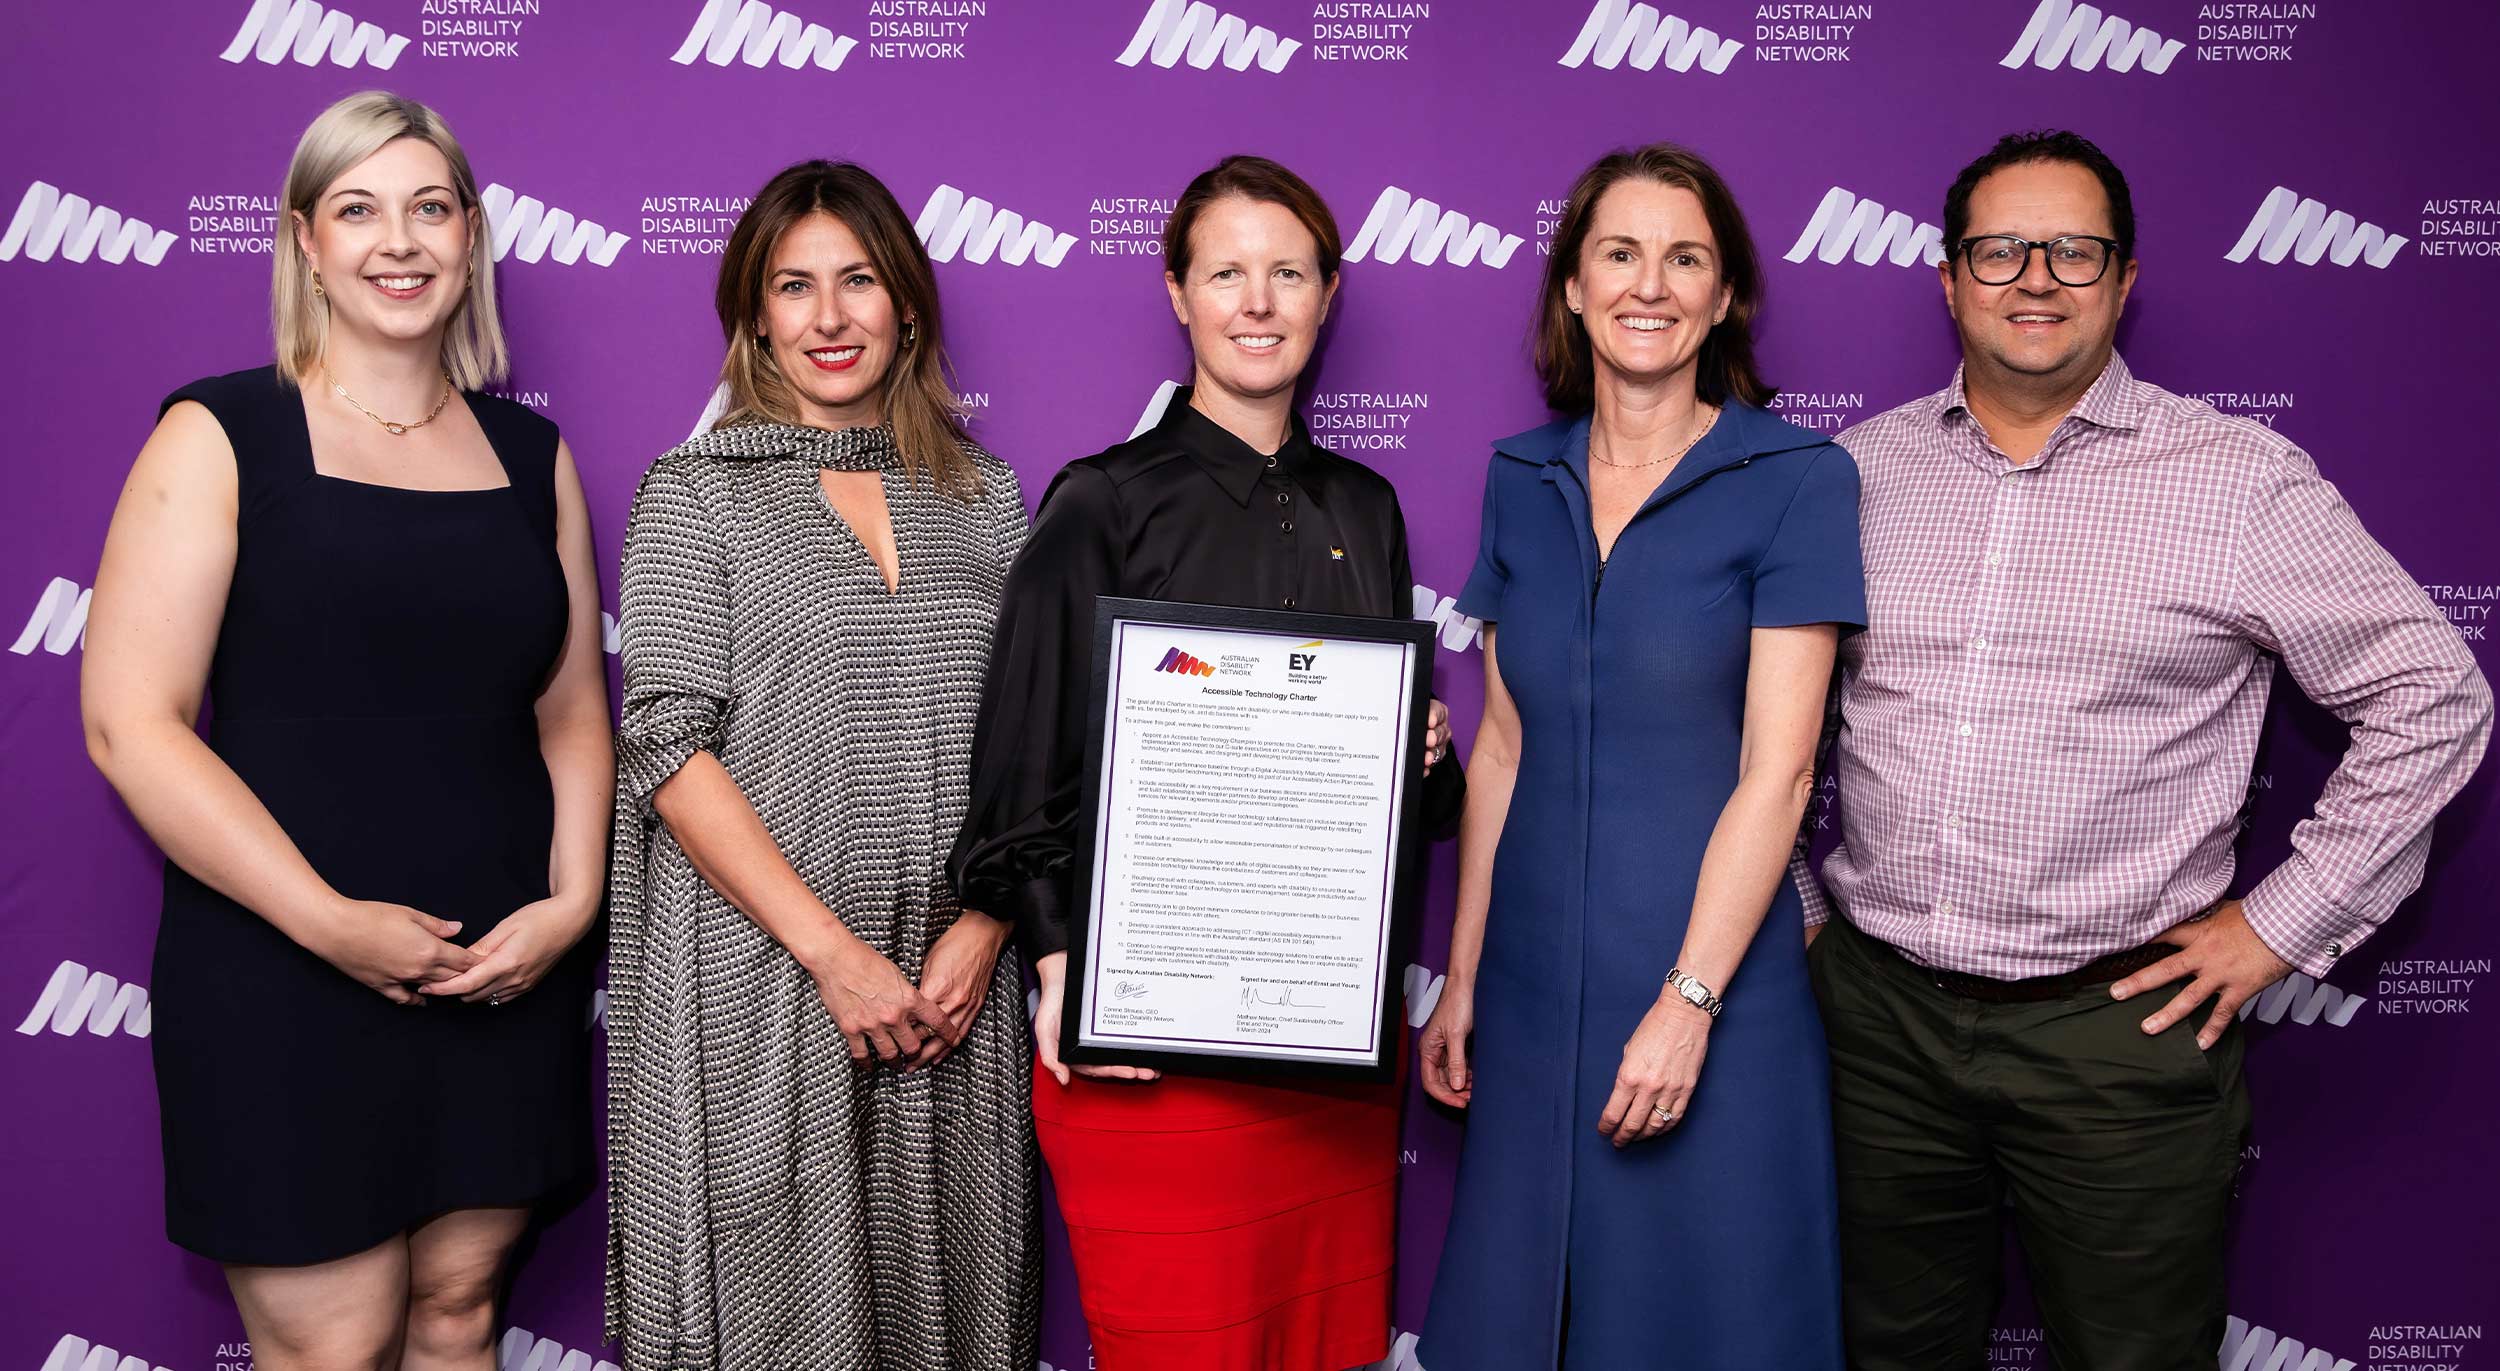 Left to right: Australian Disability Network Head of Strategy, Amber O'Shea, with Procurement Charter signers, Michelle Hyams, Louise MacDonald, Nicola Commins, Mathew Nelson. Louise is holding the charter in a frame.